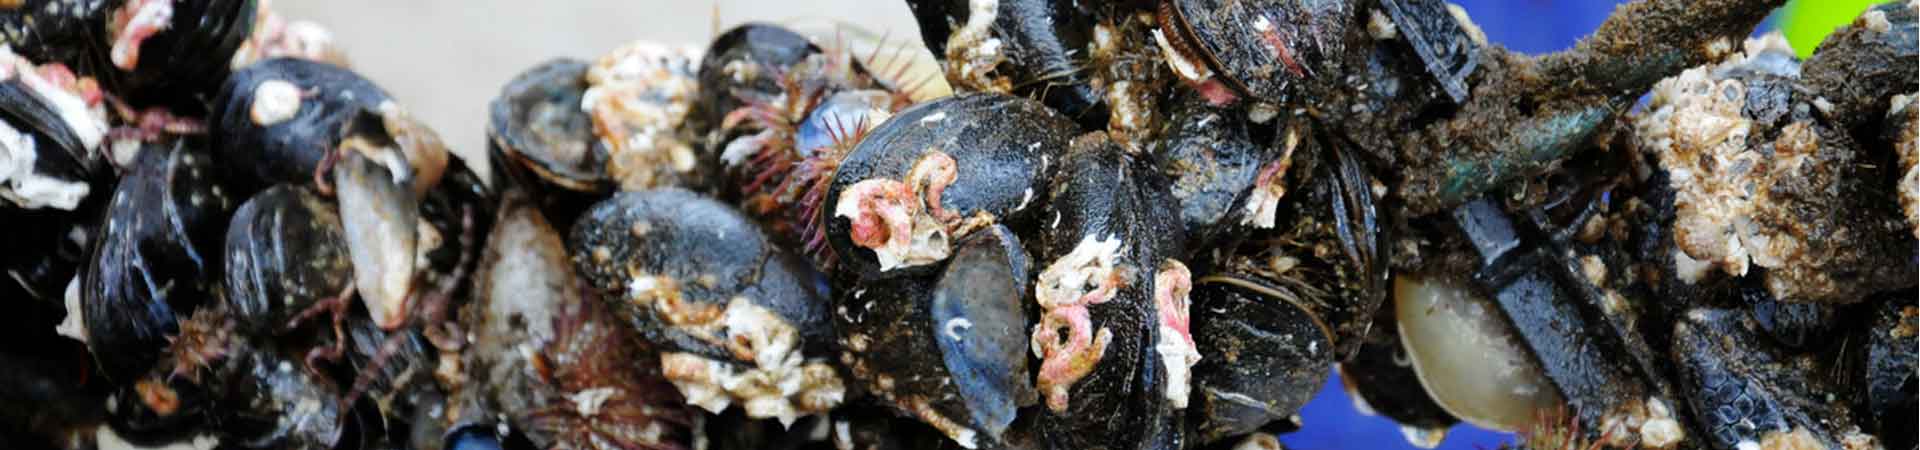 Mussels grown on a line in Loch Fyne newly harvested